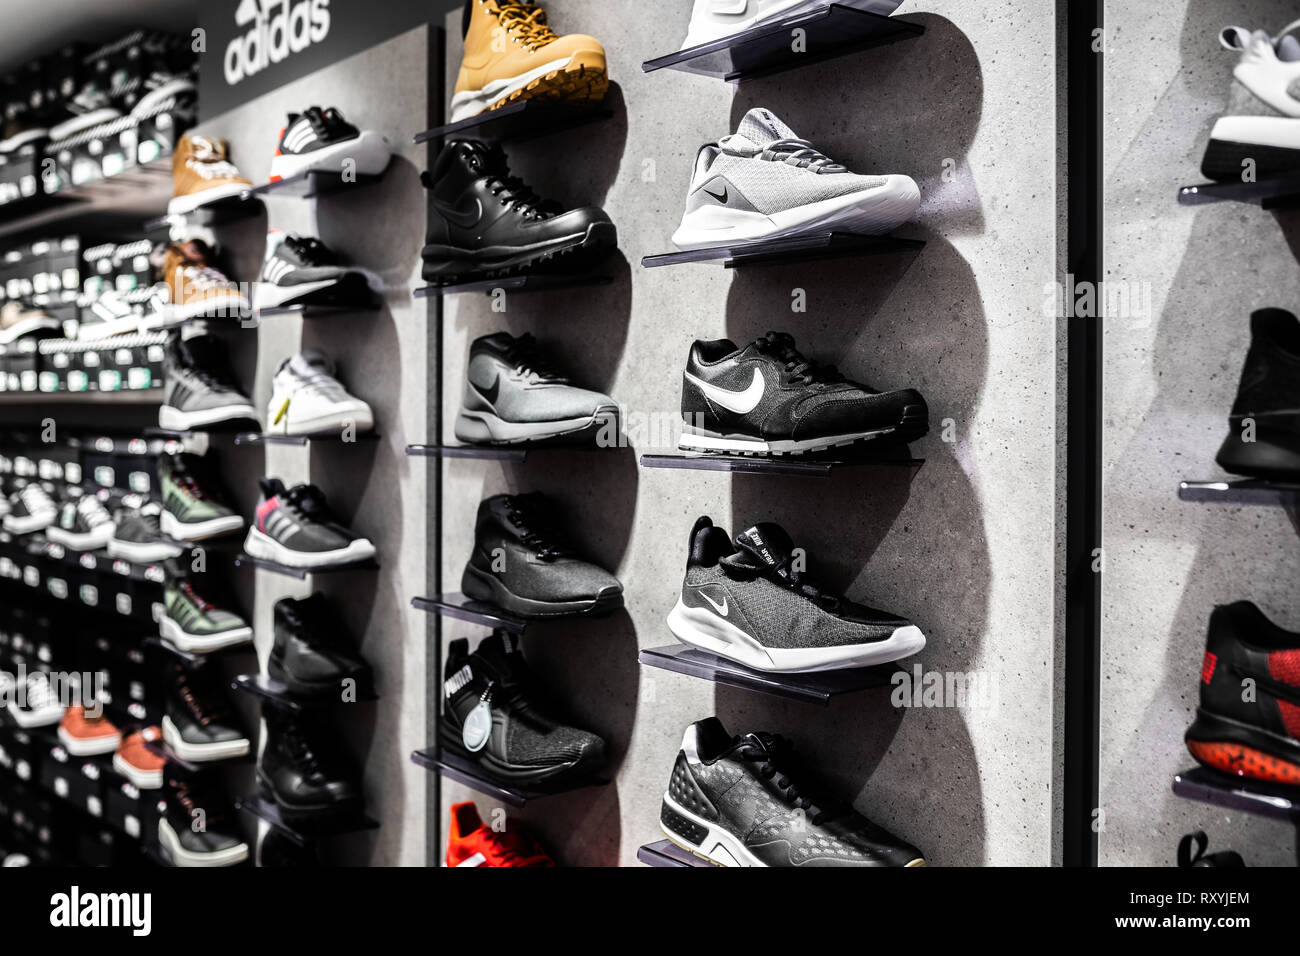 Nurmberg, GERMANY - February 27, 2019: The NIKE black man sneakers on the shell in the shop. Fashionable foot wear shoes. Stock Photo